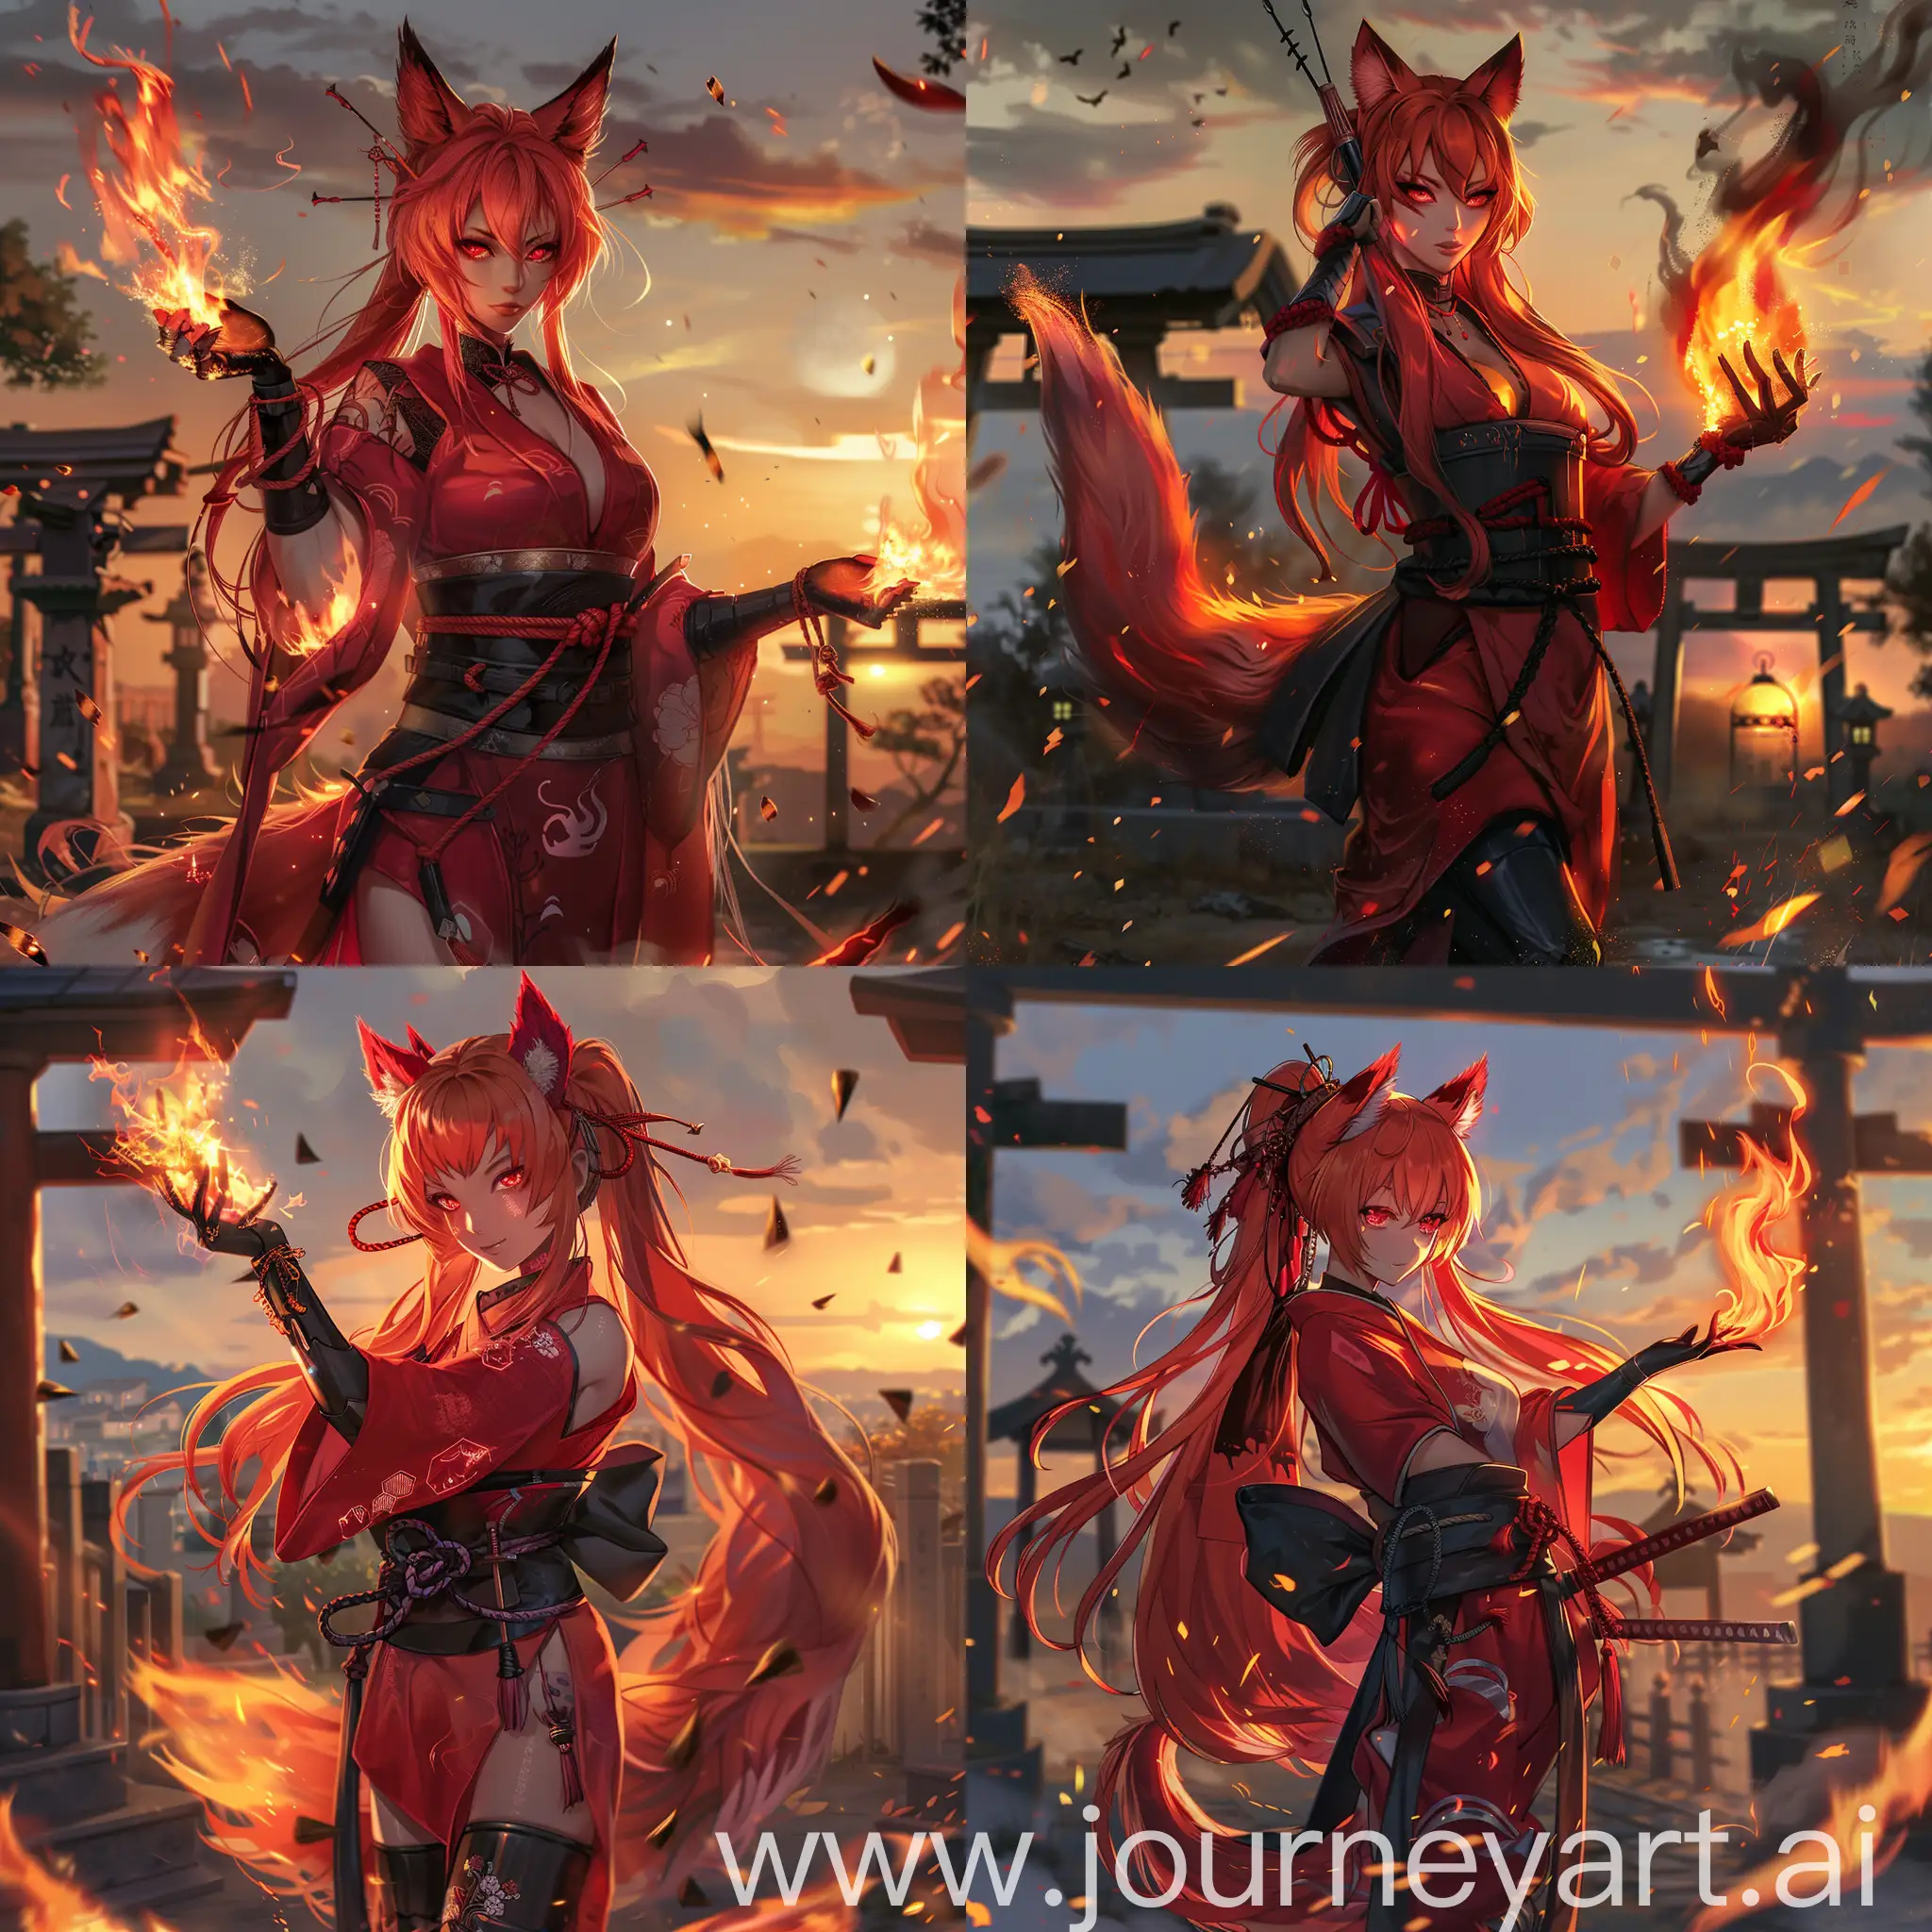 anime-style, full body, athletic, beautiful, tan skin, asian woman, long fiery red hair, red fox ears, red fox tail attached to her waist, fiery red eyes, wearing a red kimono, black hakama, black sash, long black gloves, black leather boots, casting fire magic, hands wrapped in fire,  good anatomy, dynamic, embers falling in foreground, shinto shrine, sunset